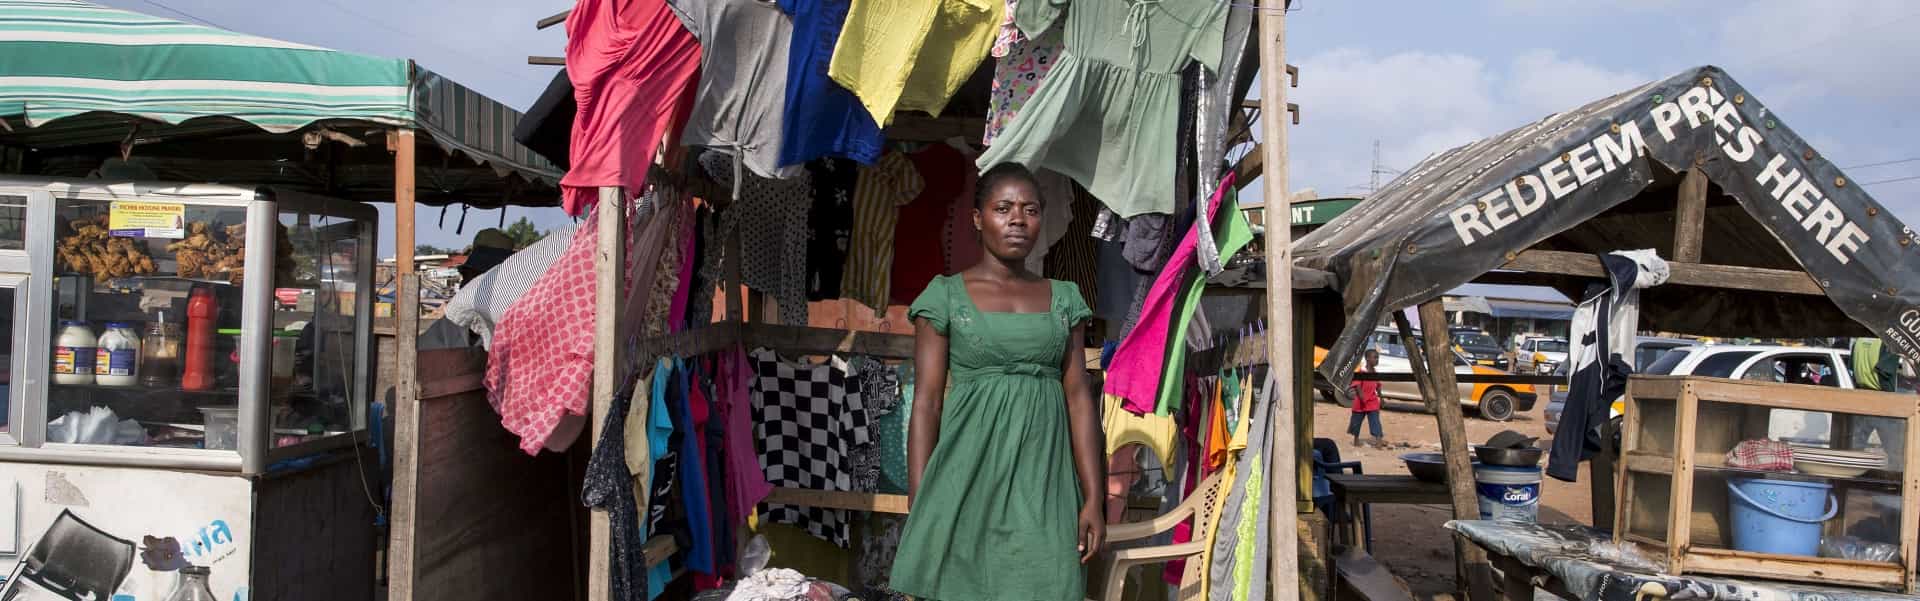 Ghanaian woman standing in clothing stall in wind